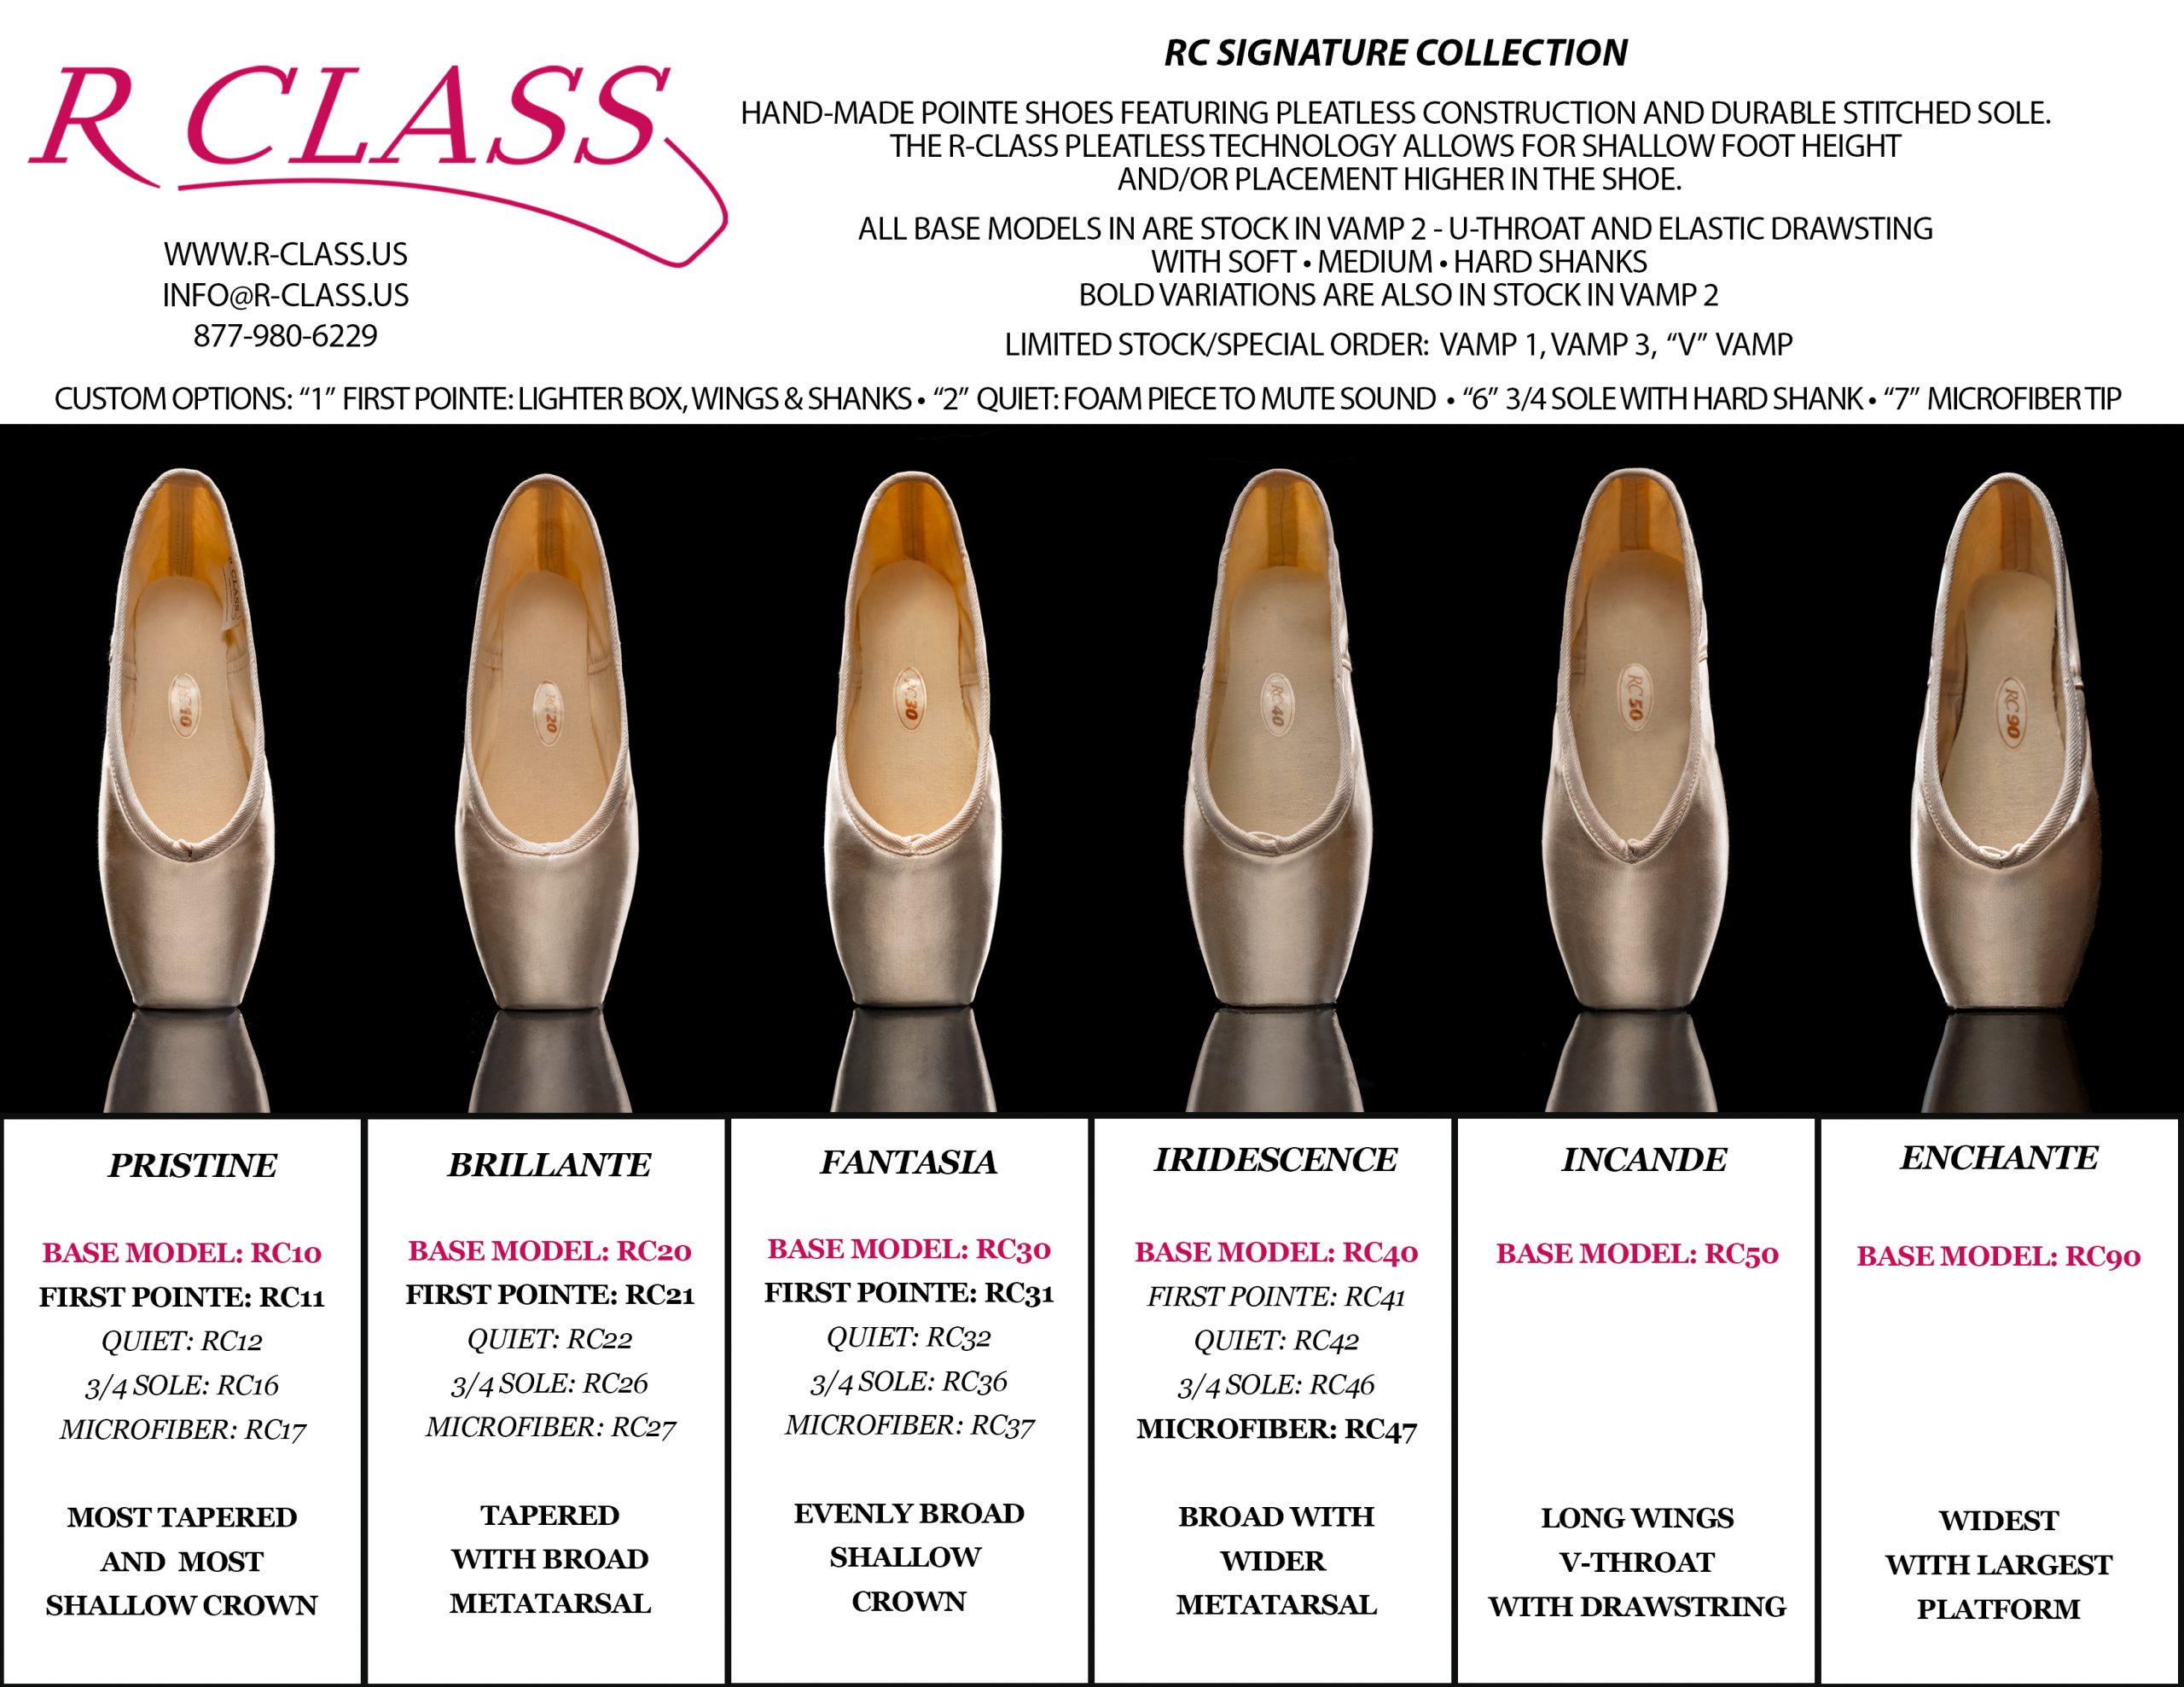 R-Class Signature Collection of pleatless hand-made pointe shoes. Each of the 6 models ranges from most tapered to most broad. Base models end in 0. Other variations end with 1,2,6,or 7. 